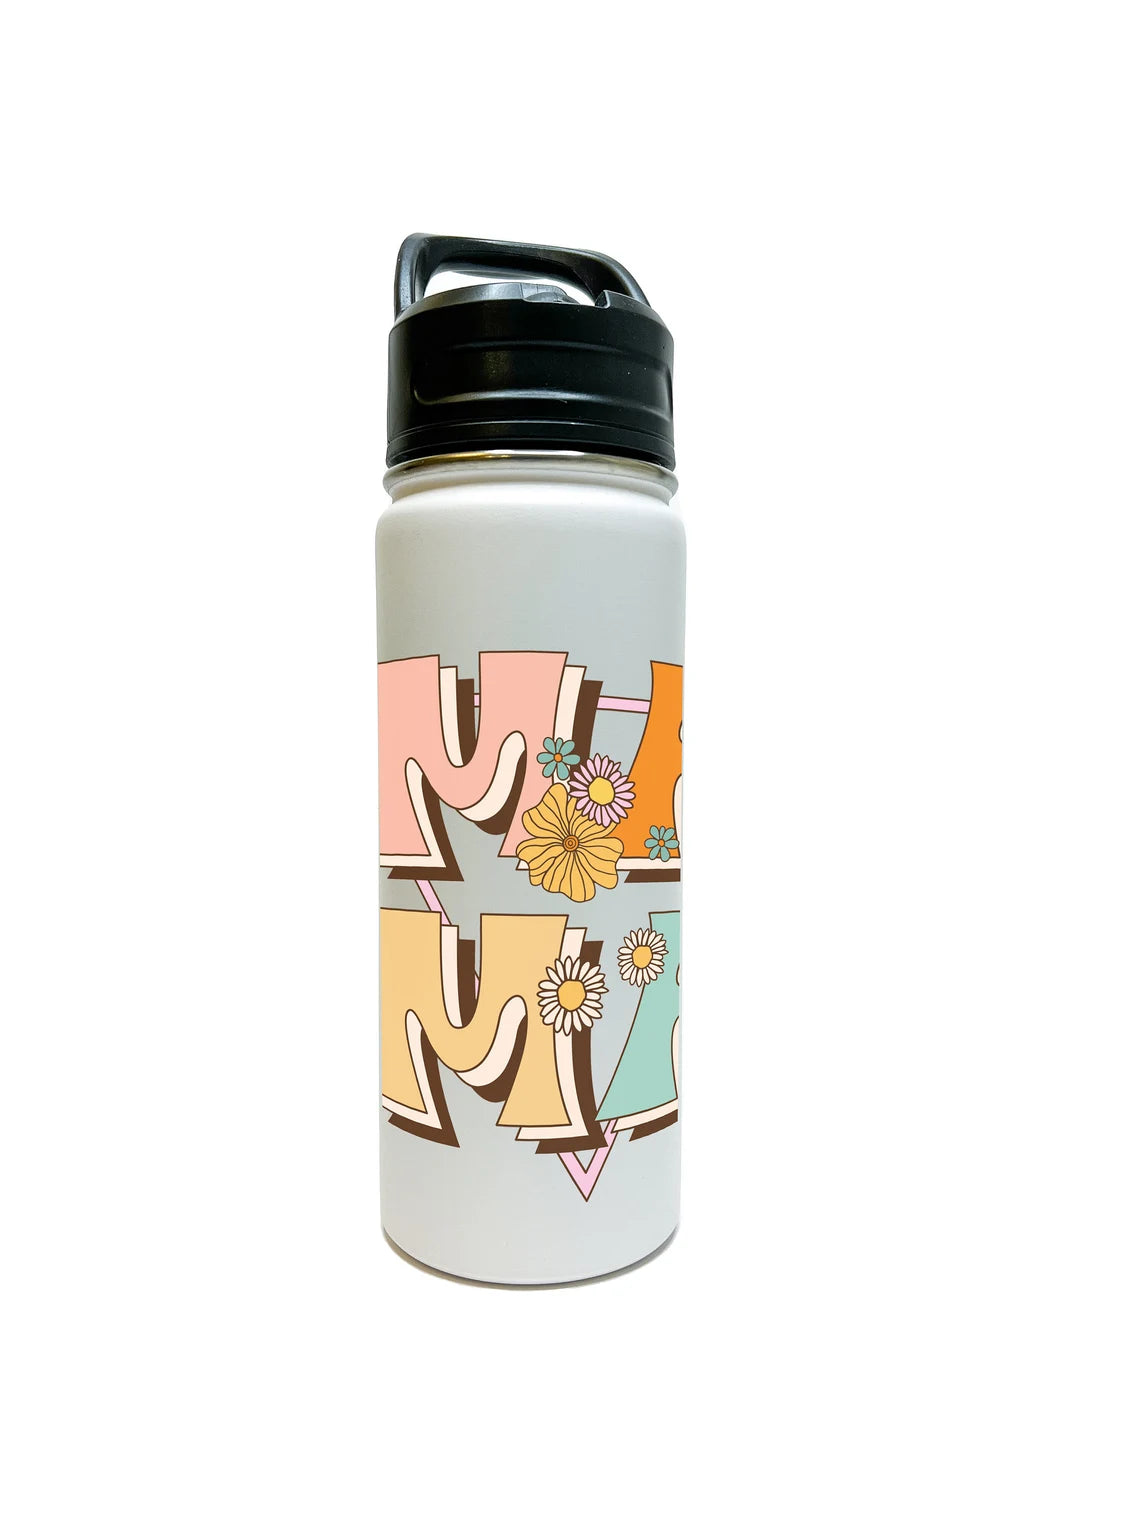 Mama Floral Design Water Bottle 18/32 oz Stainless Steel Insulated Flasks